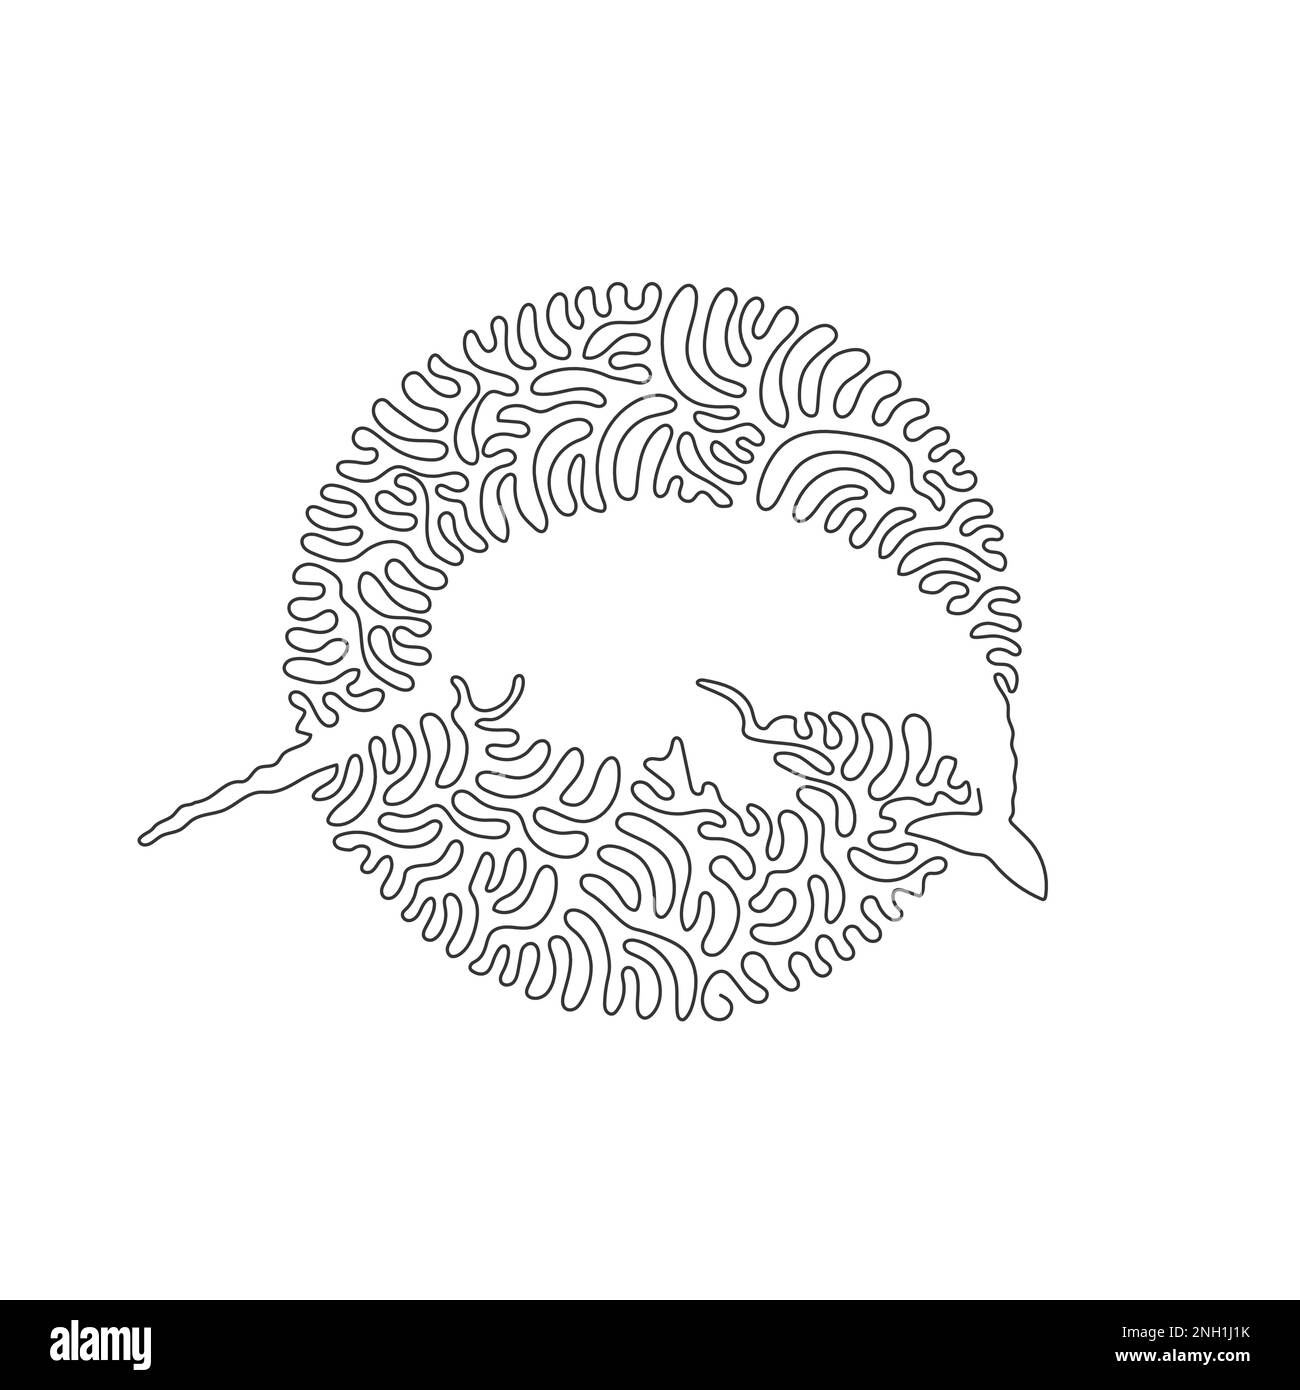 Single curly one line drawing of cute narwhal abstract art. Continuous line drawing graphic design vector illustration of horned narwhal teeth Stock Vector